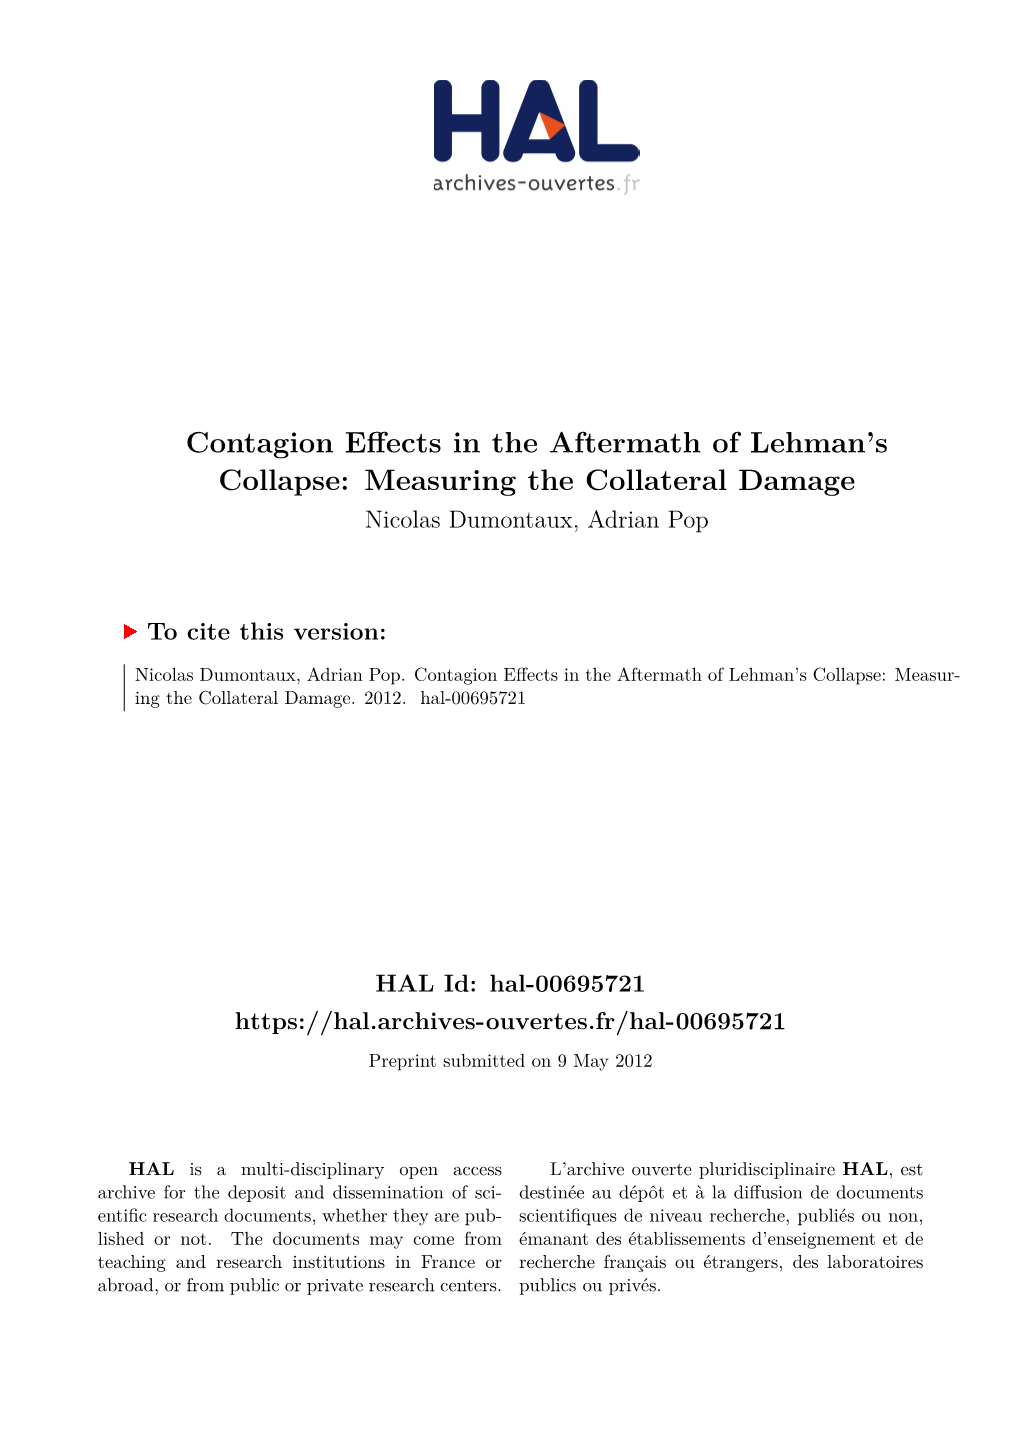 Contagion Effects in the Aftermath of Lehman's